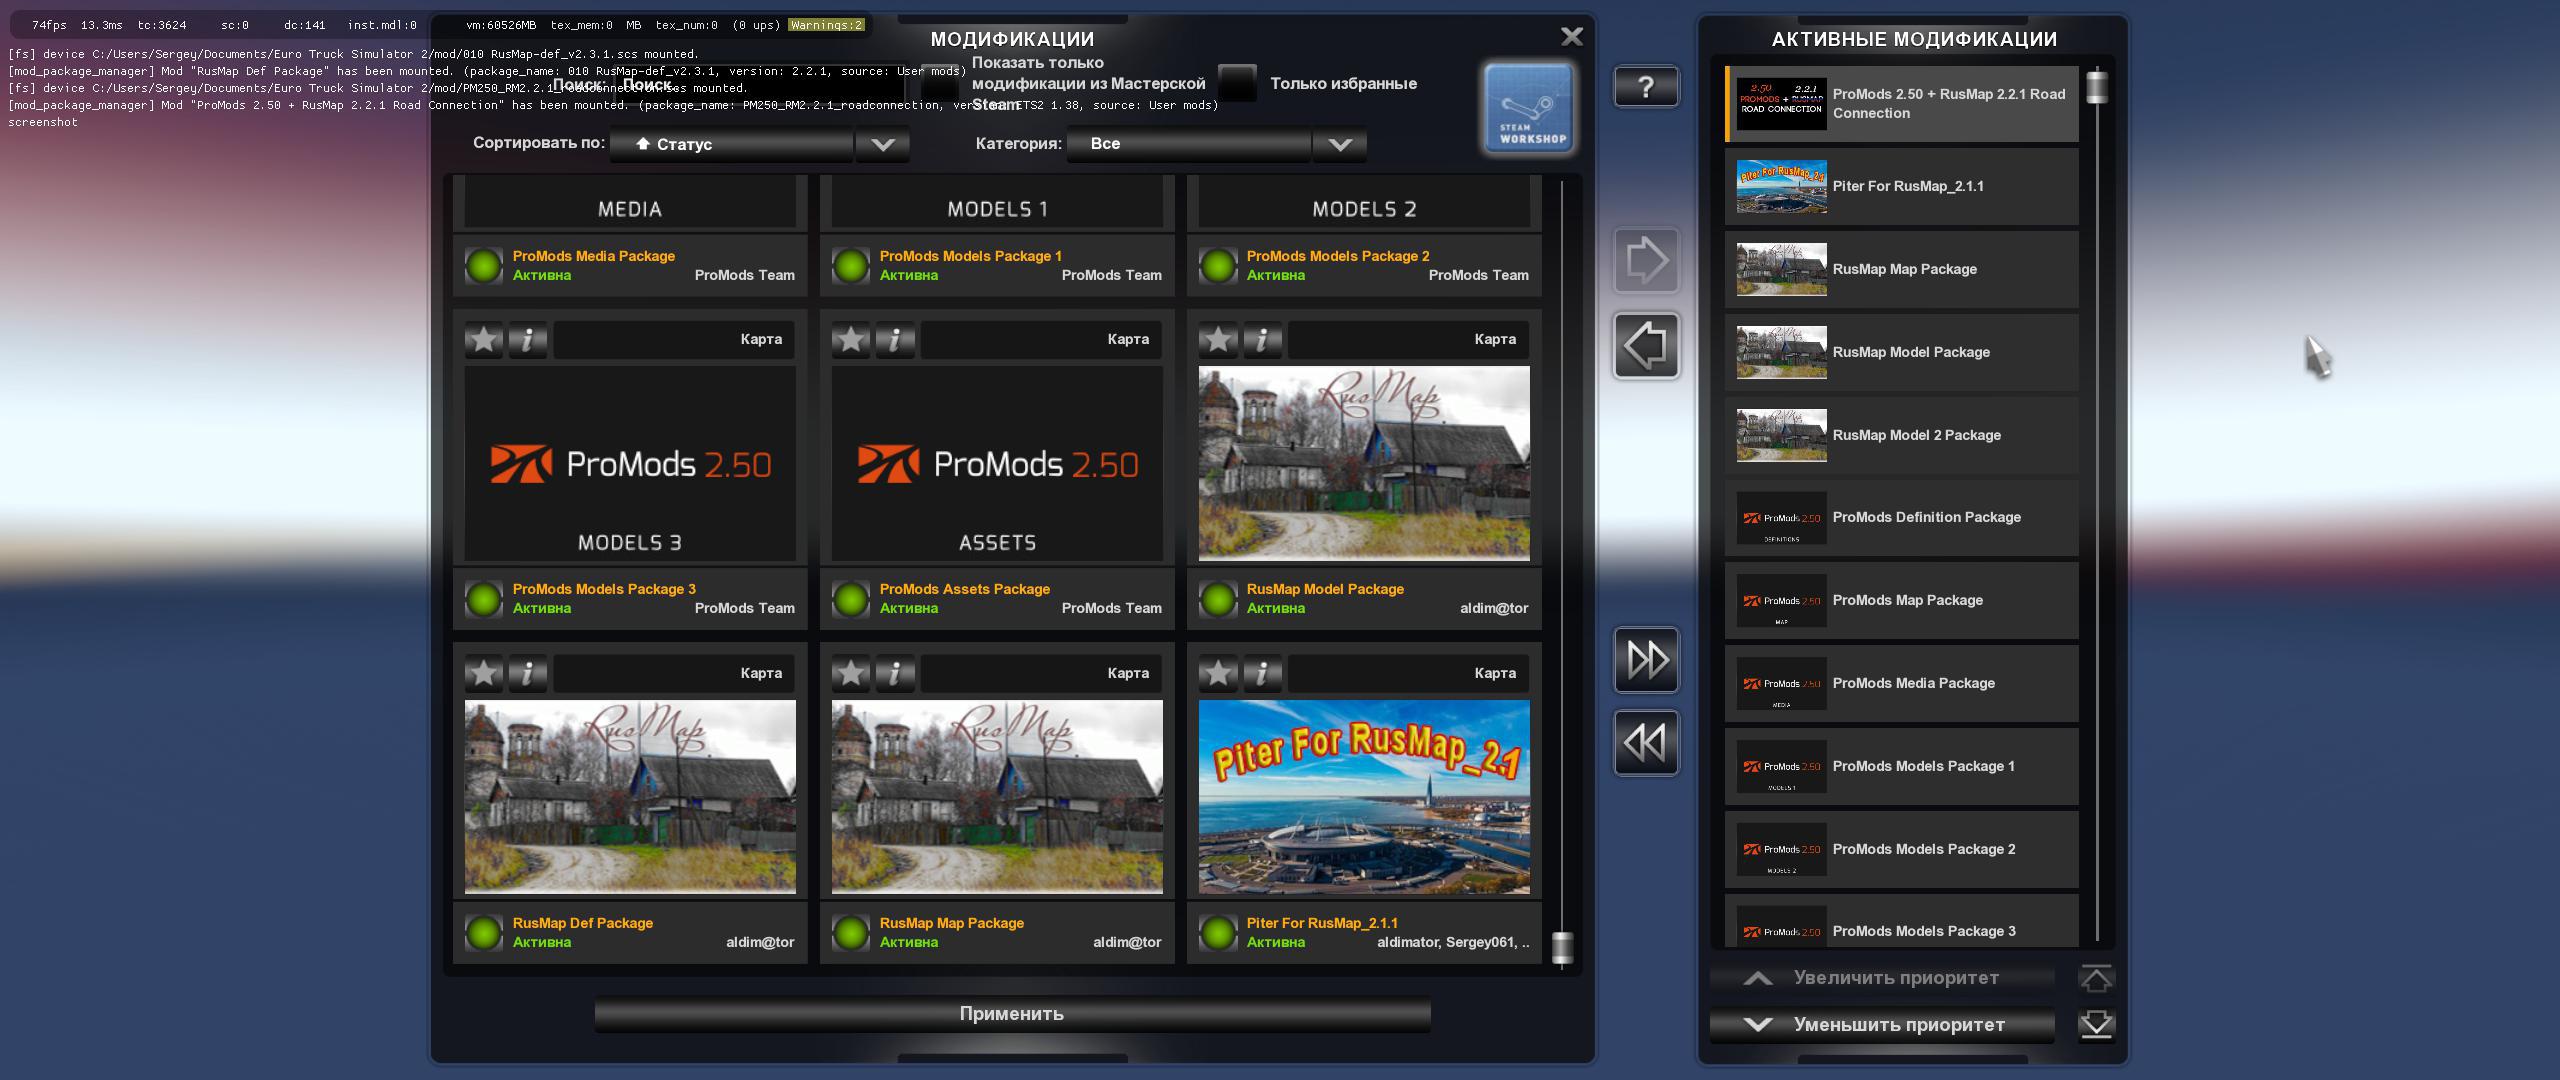 Promods Rusmap Road Connection 2 09 Release 1 38 Ets 2 Mods Ets2 Map Euro Truck Simulator 2 Mods Download